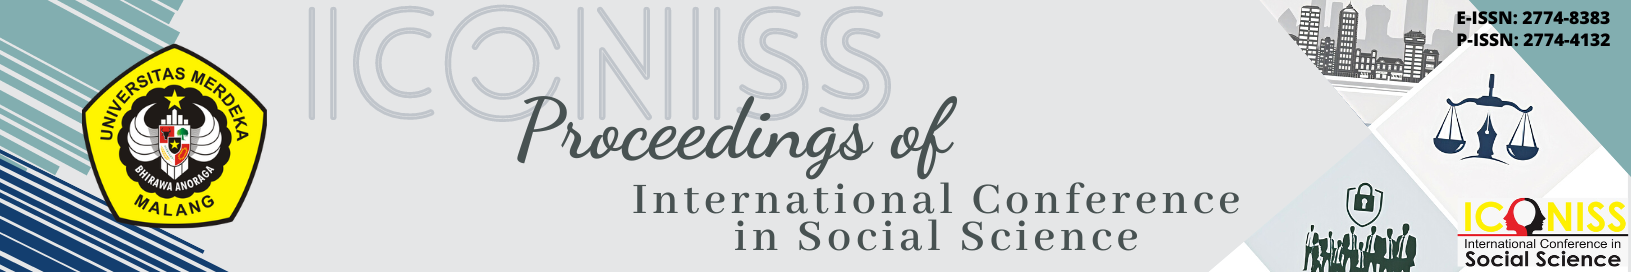 Proceedings of International Conference in Social Science